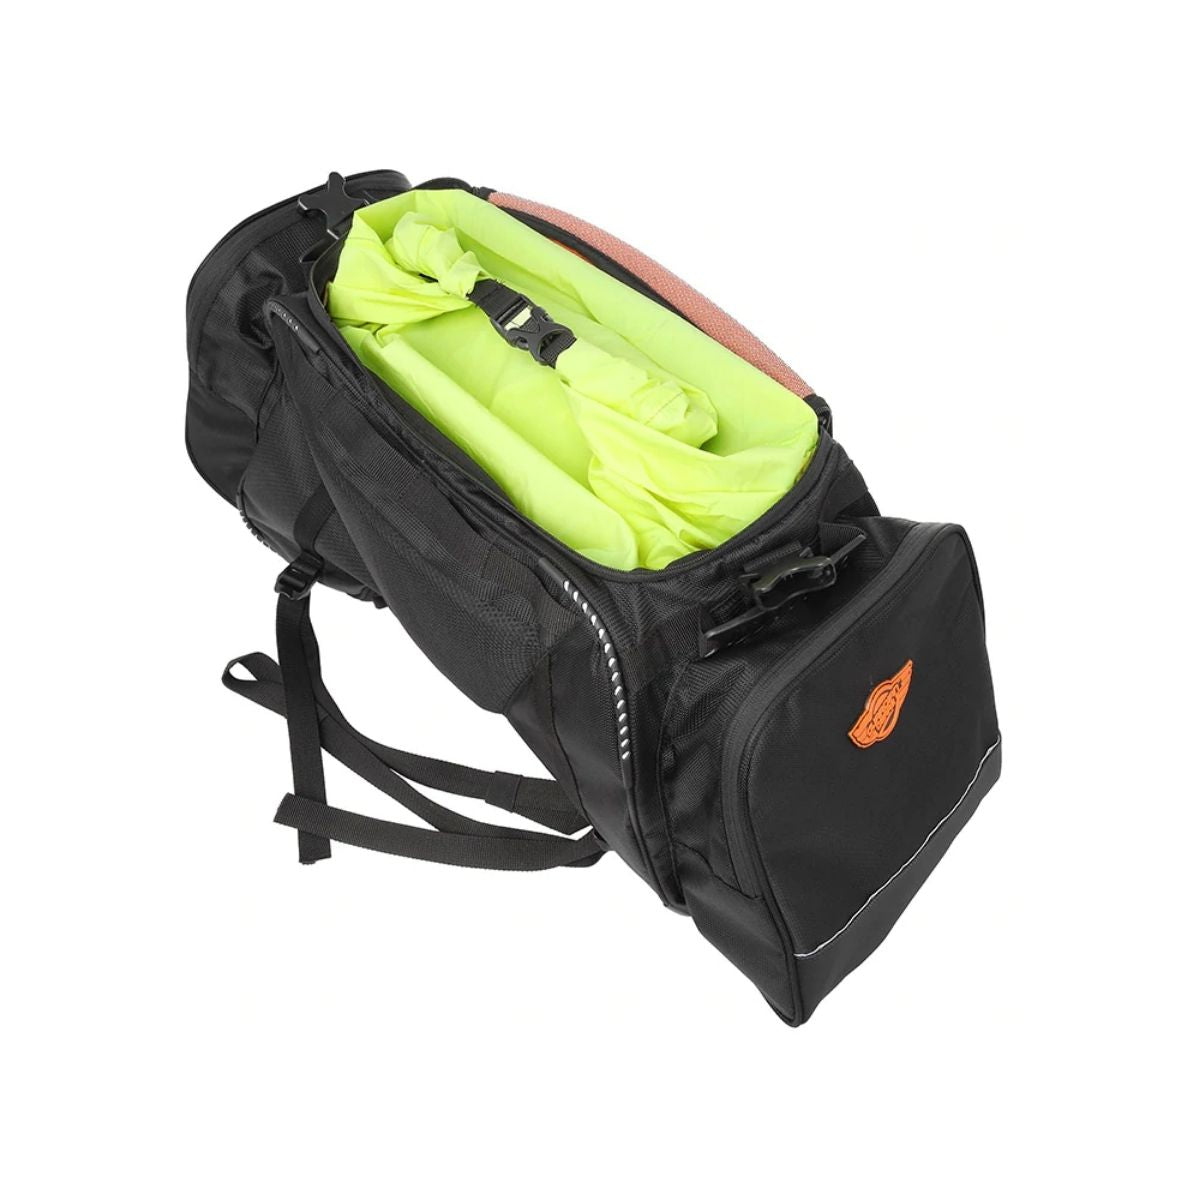 Rhino 70L Tail Bag with Rain Cover and Dry Bag - Black - 7